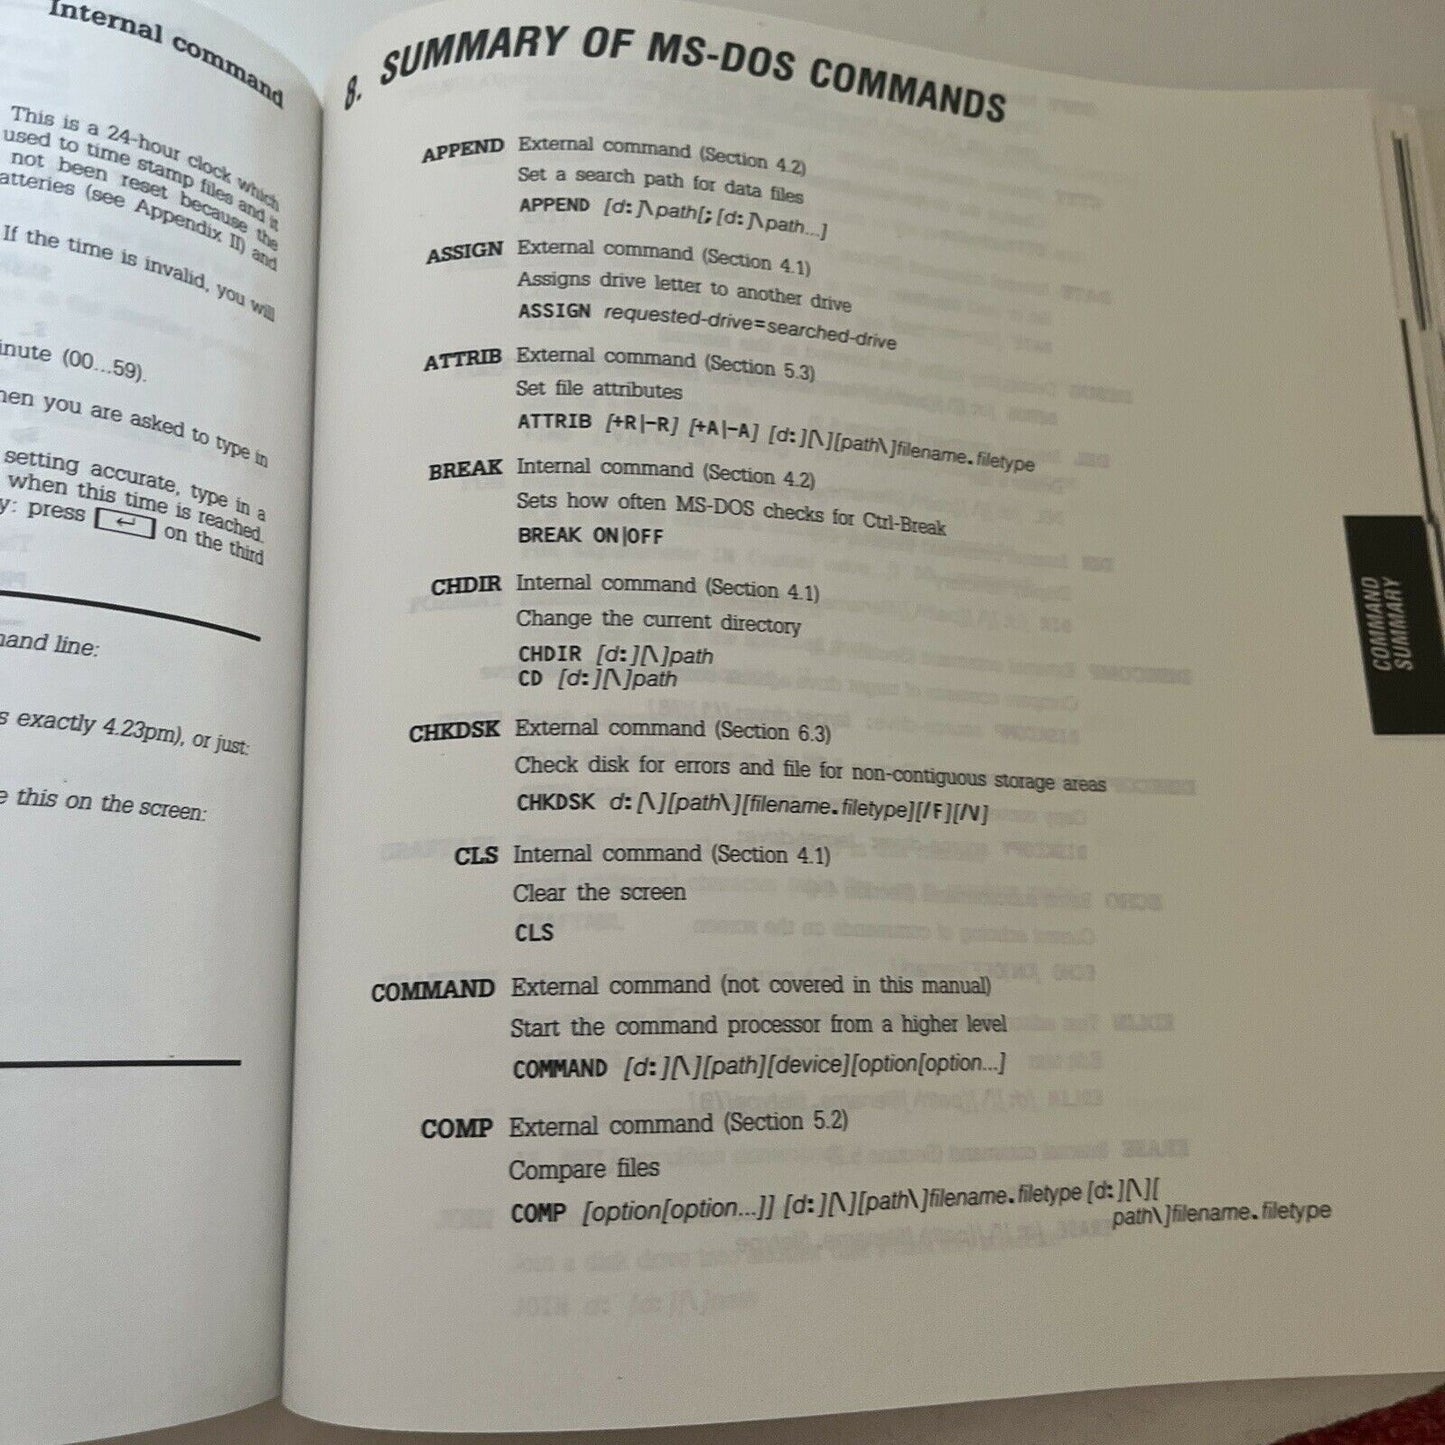 Amstrad PC1512 Personal Computer User Instructions - Book 1 1986